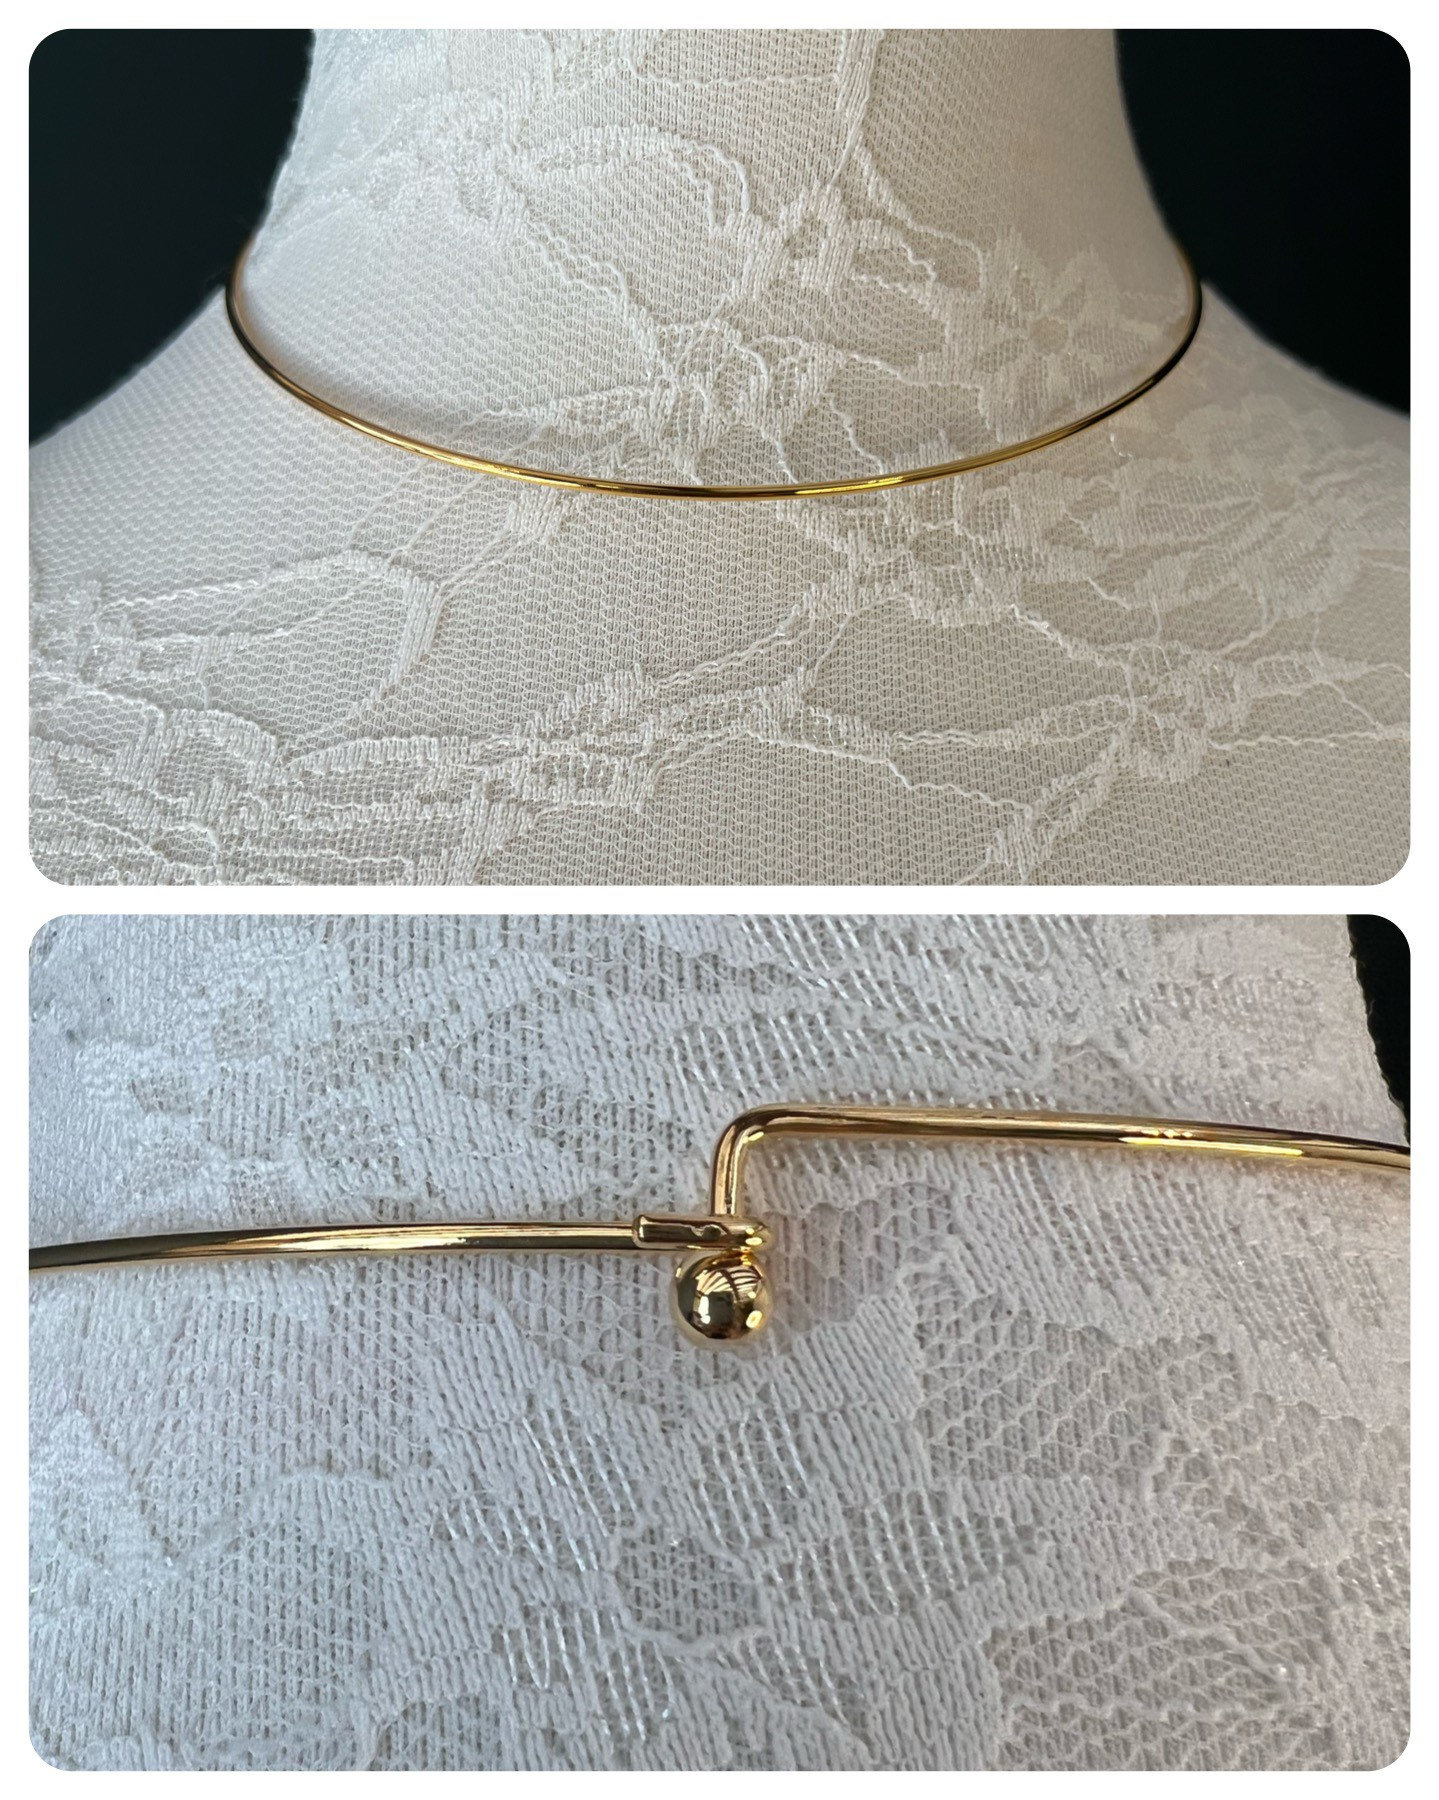 Choker in thick wire, Collar Neck-wire round Necklace, Easy lock Choker for  large Pendant. Plus Size to Petite